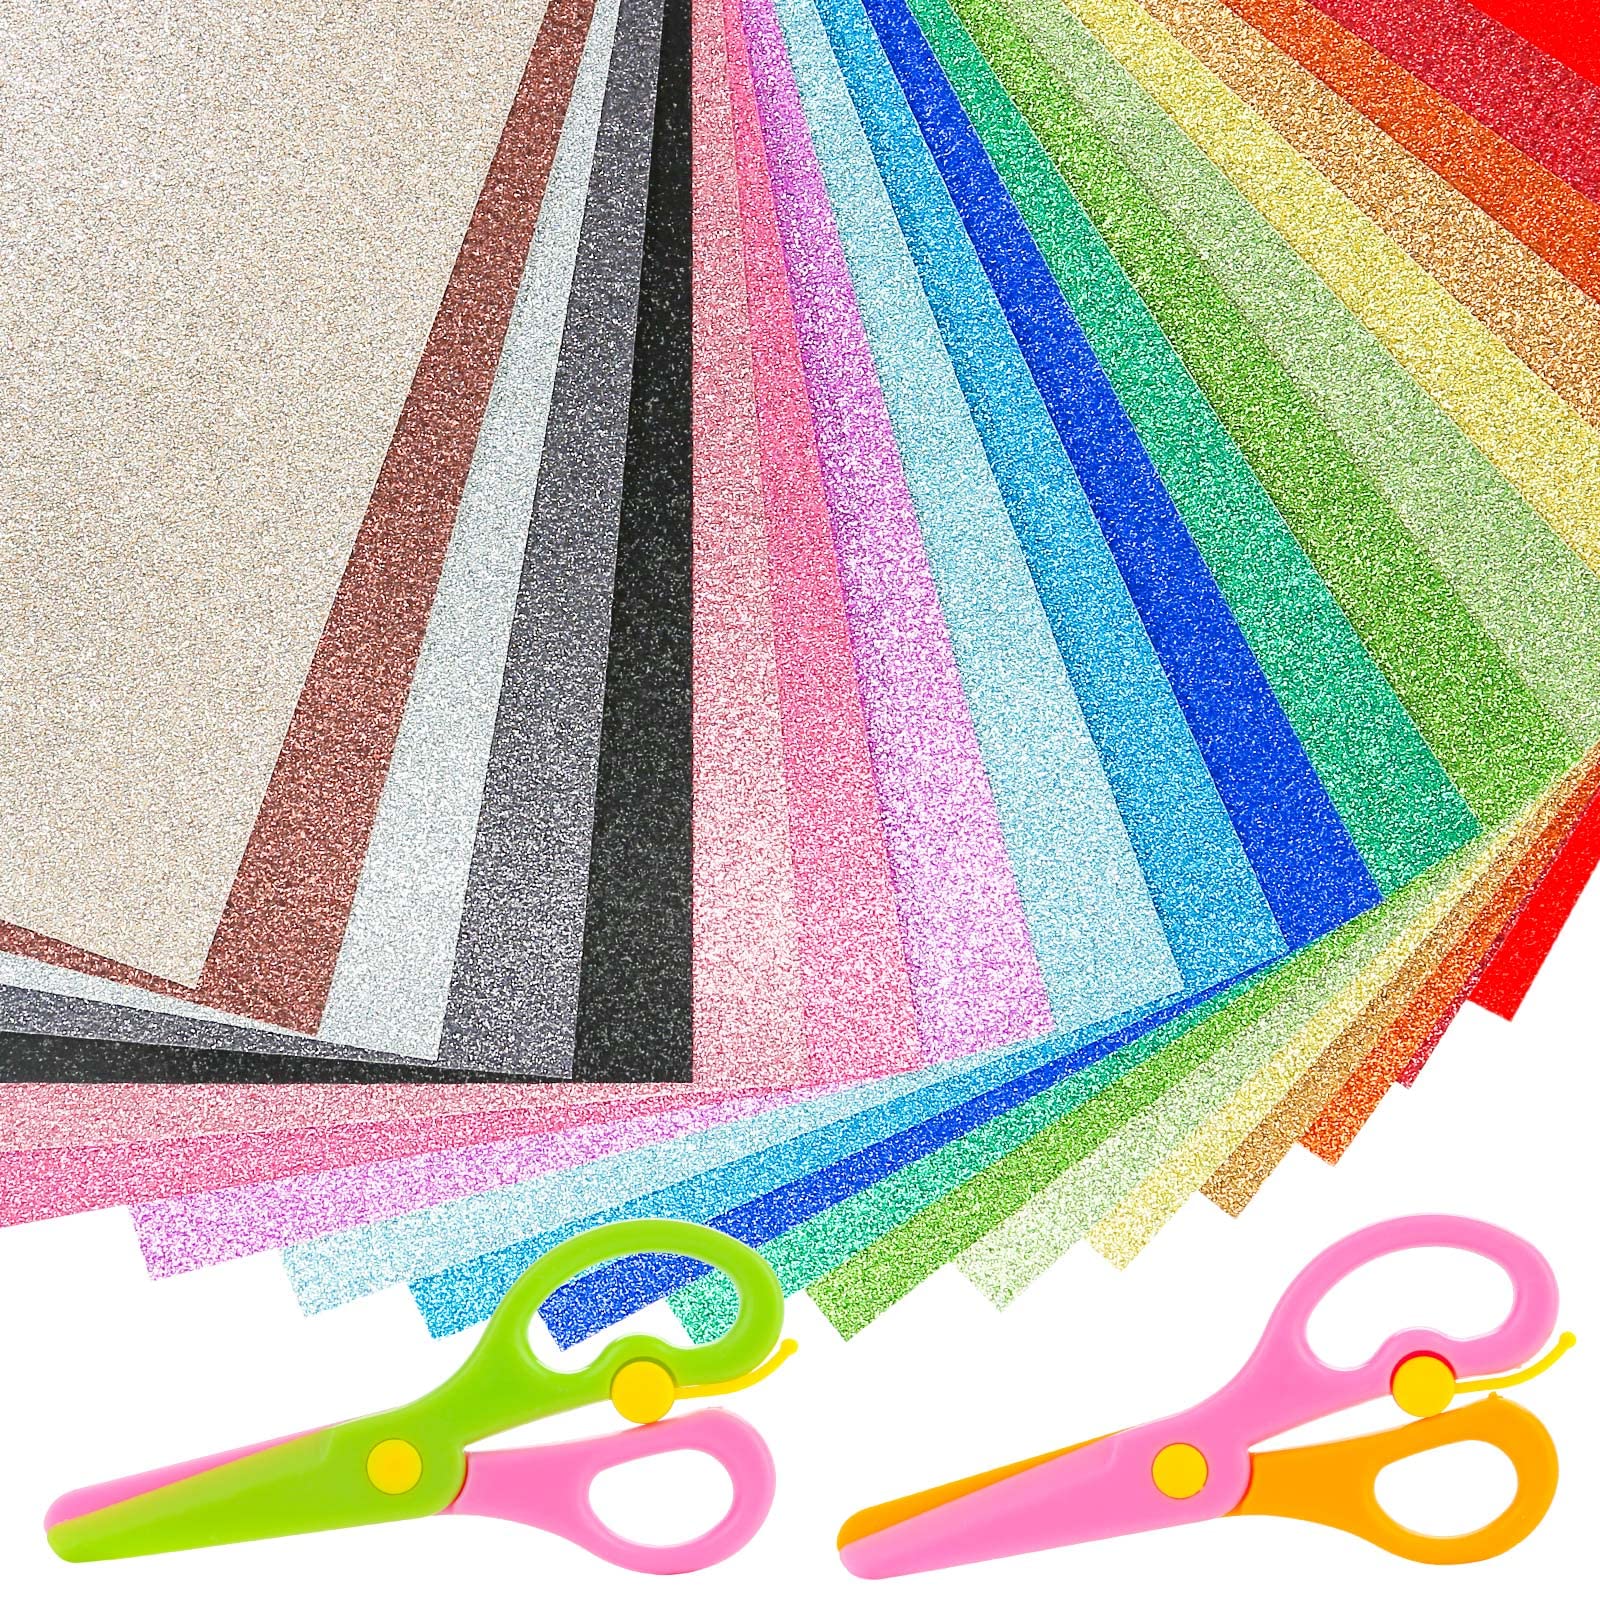 BigOtters Glitter Cardstock Paper 40 Sheets Sparkly Paper Premium Craft  Cardstock with 2 Scissors for Christmas Thanksgiving Gift Box Wrapping  Birthday Party Decor Scrapbook 20 Colors 250GSM